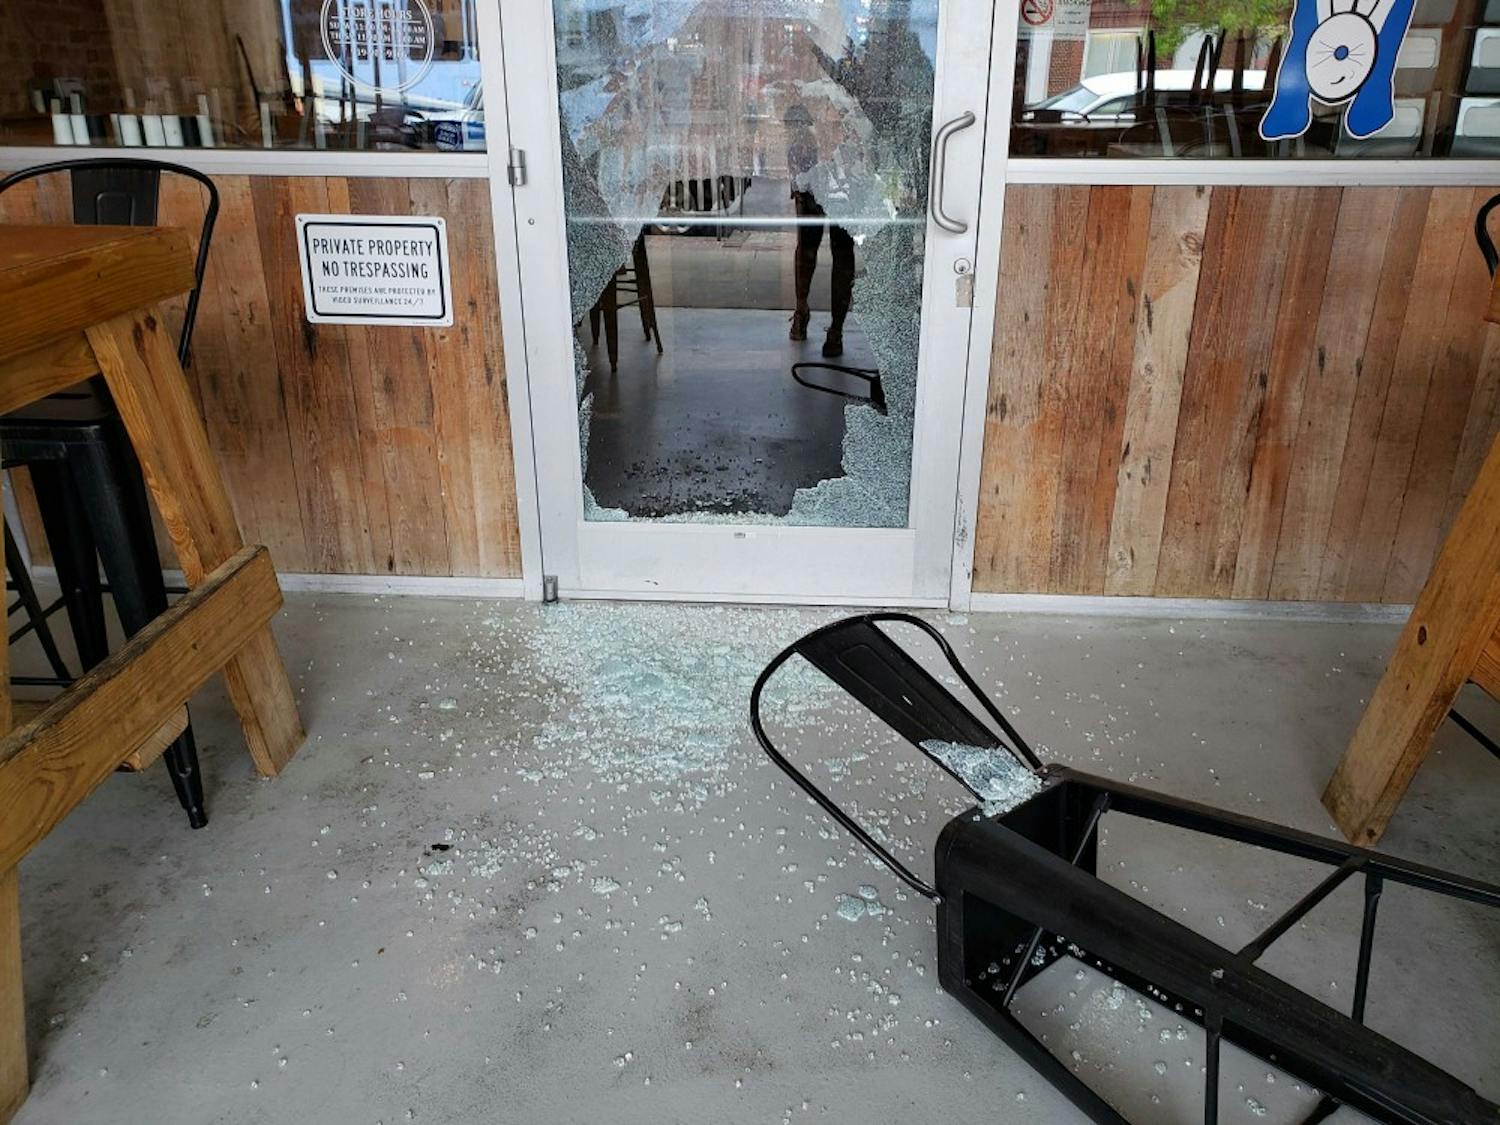 The storefronts of Sup Dogs and what was Tama Tea have been shattered. According to the Town, it seems no one entered the building, but instead through chairs to shatter the glass. Photos by Anna Pogarcic & Erin O’Rourke.